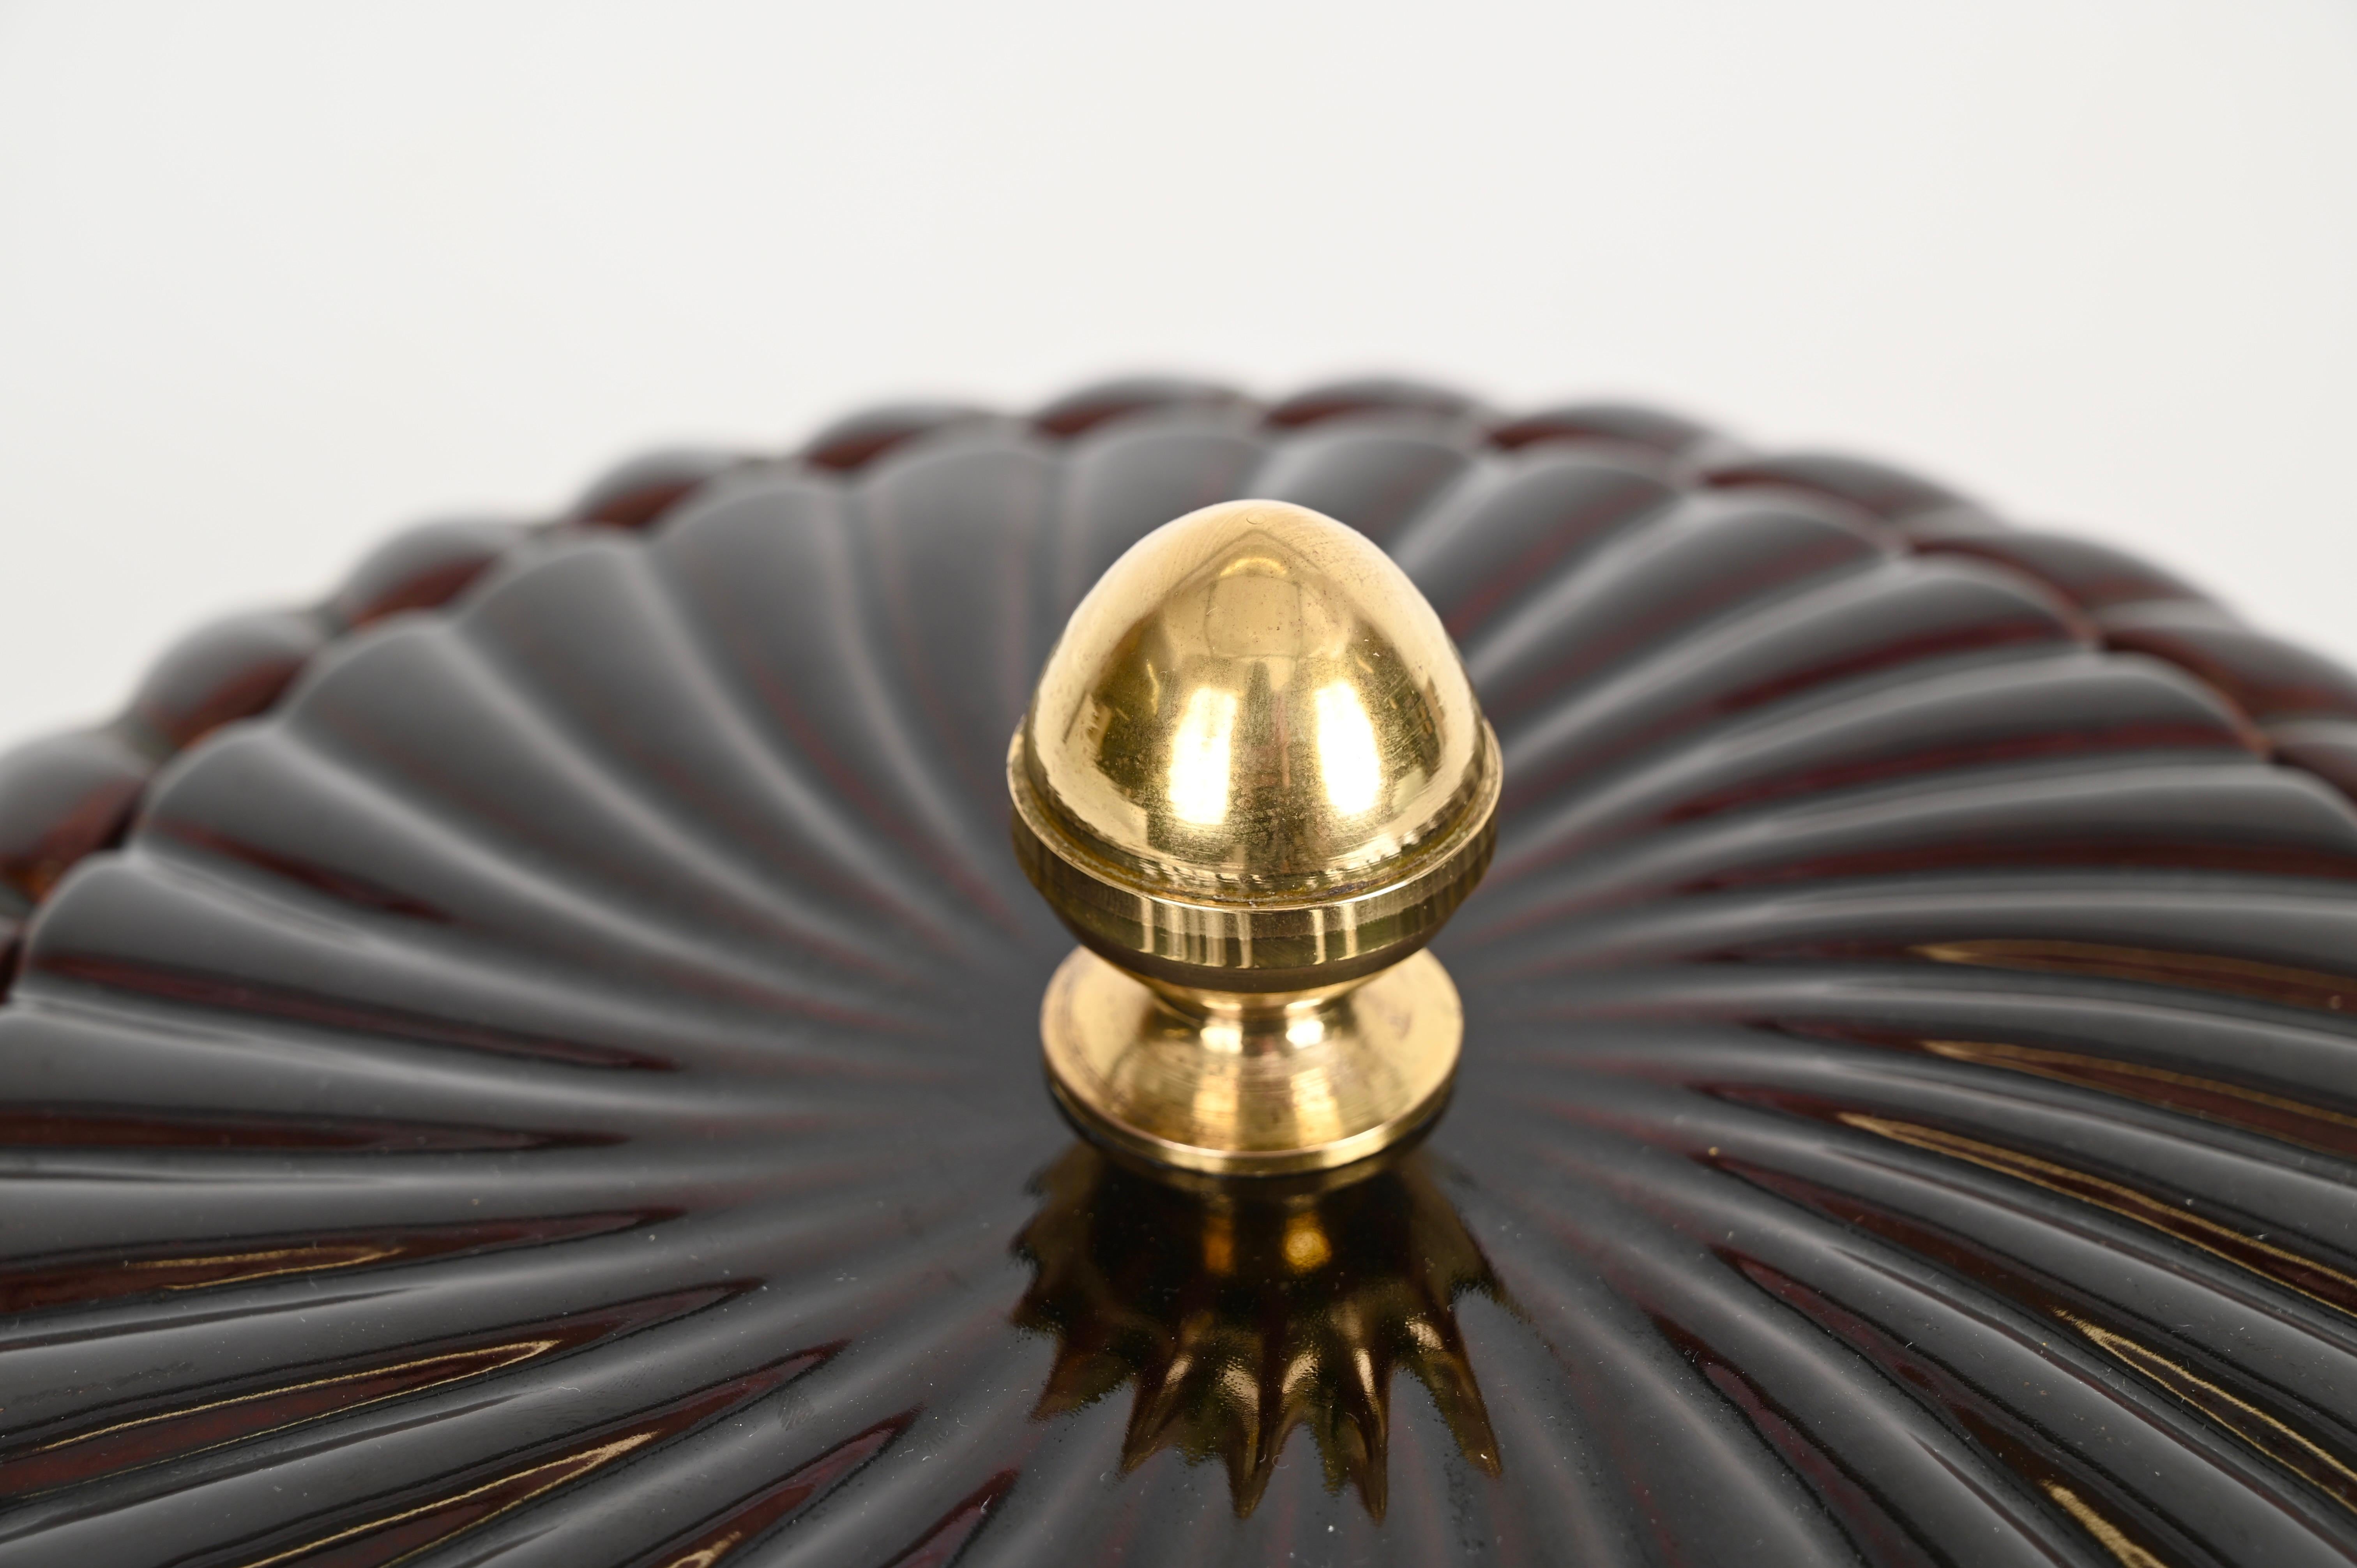 Tommaso Barbi Brown Ceramic and Brass Decorative Box or Centerpiece, Italy 1970s For Sale 3